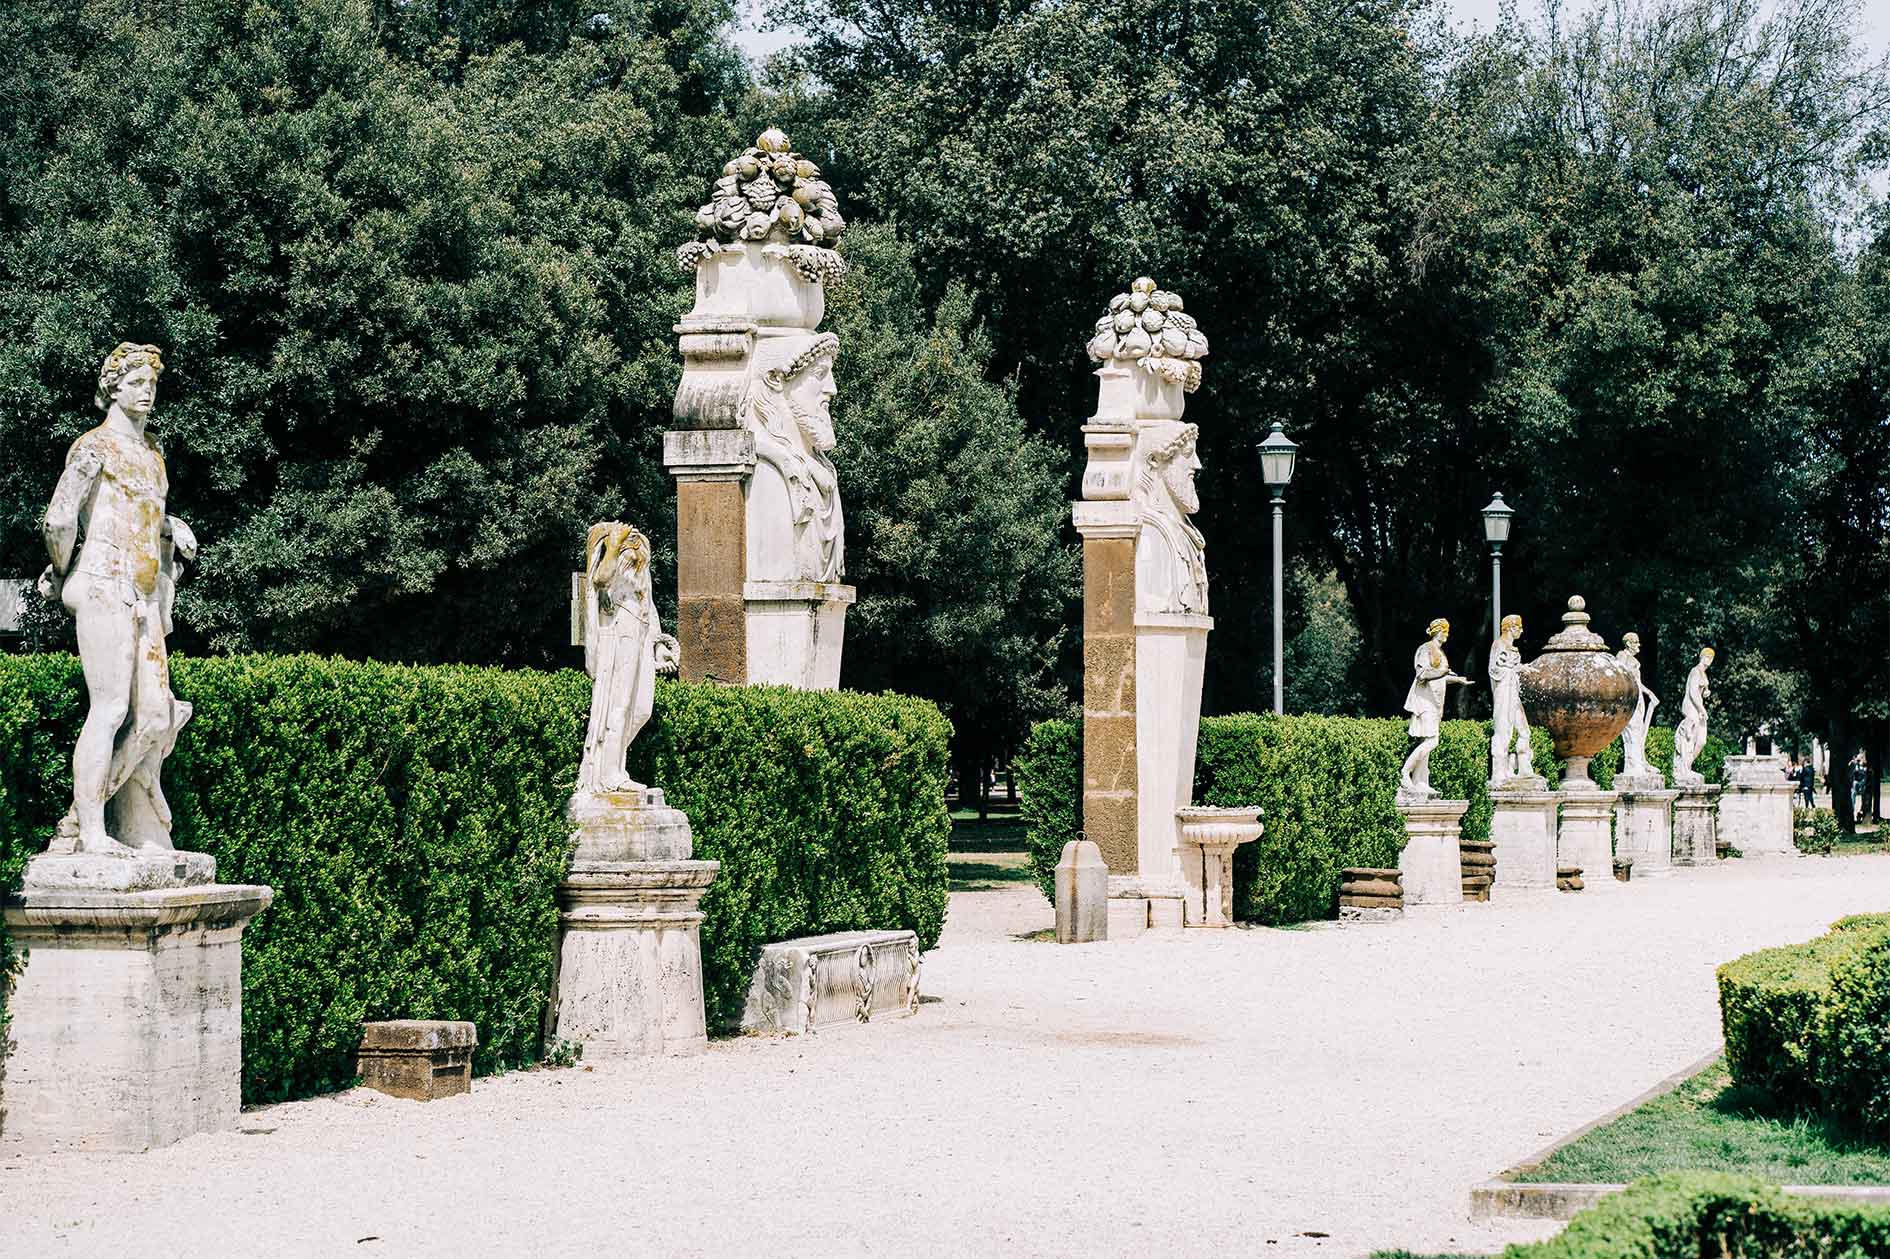 Statues in the Borghese Gardens